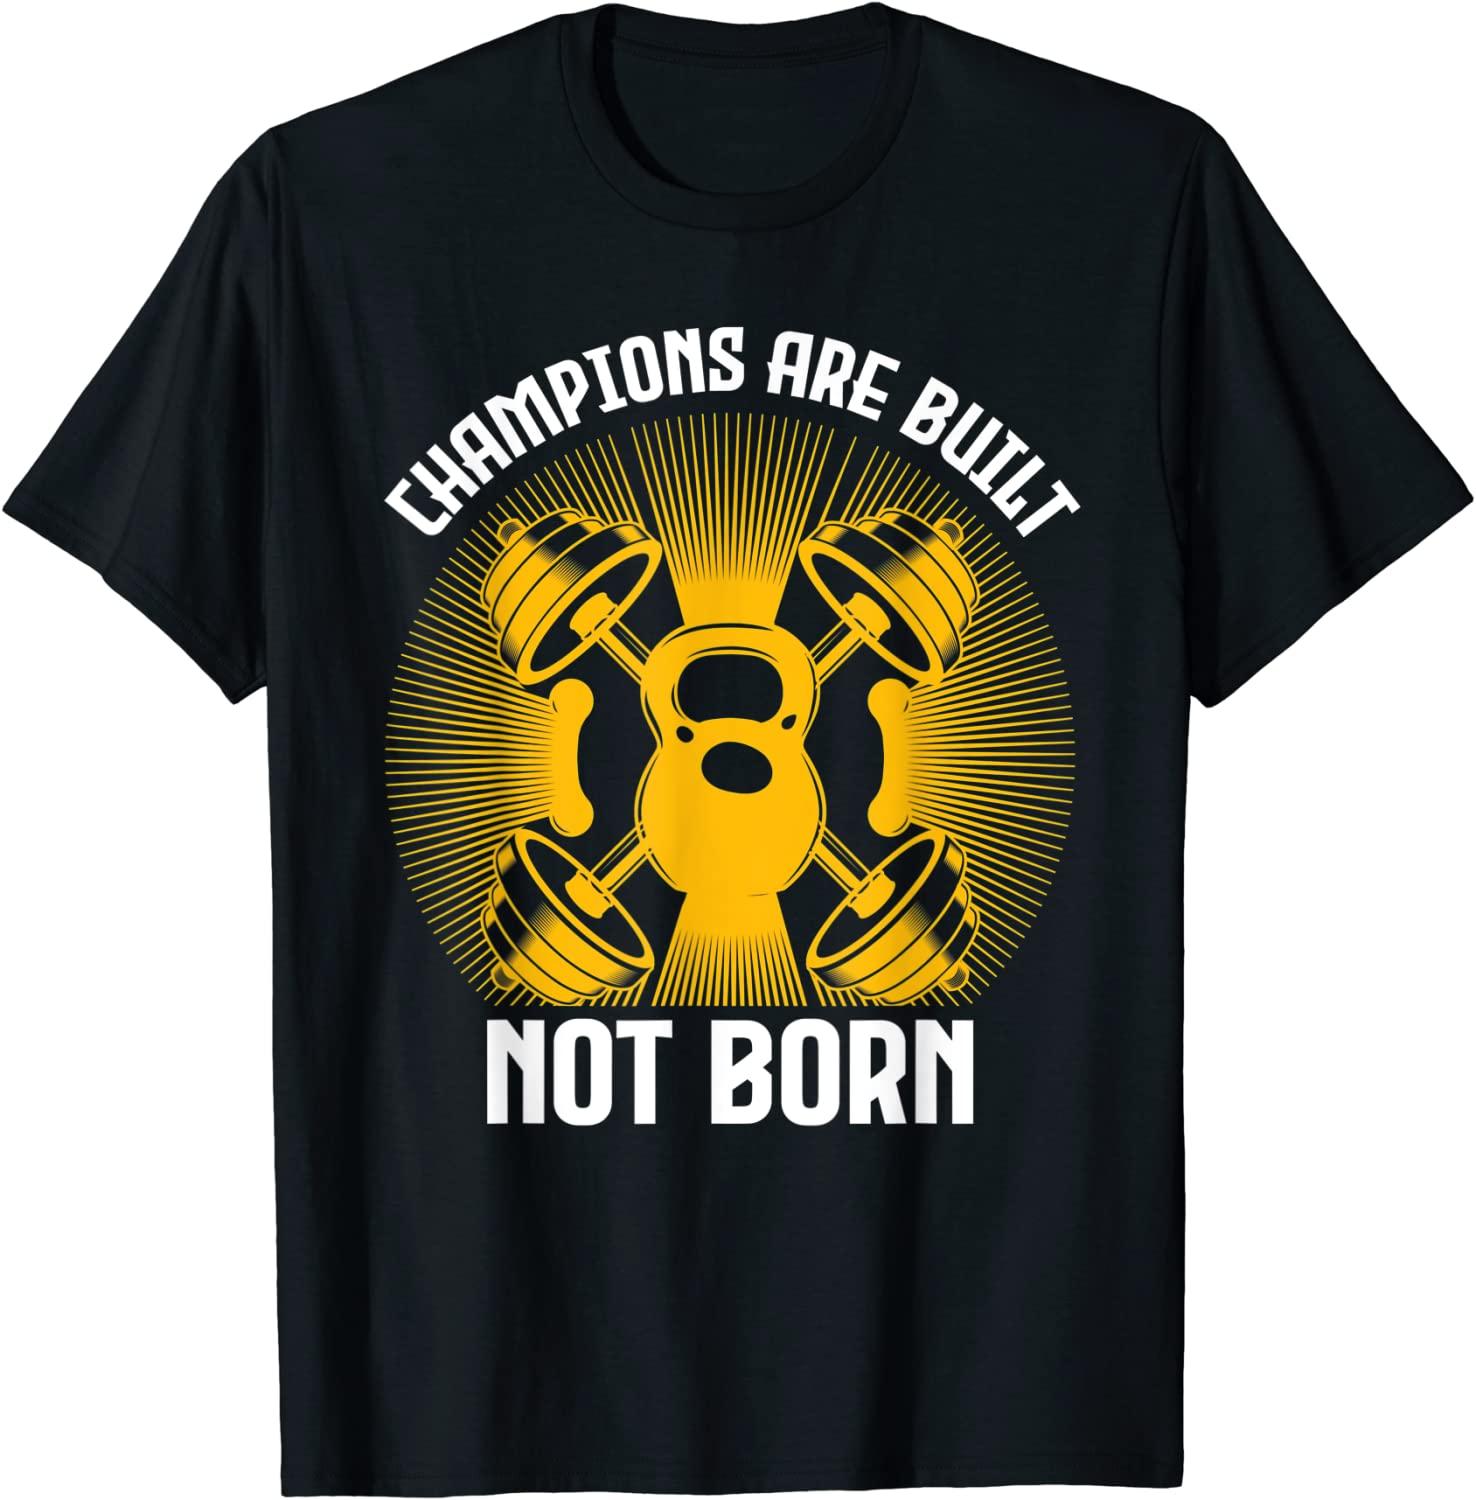 Champions Are Built Not Born: Fitness and Motivation T-Shirt Best Price